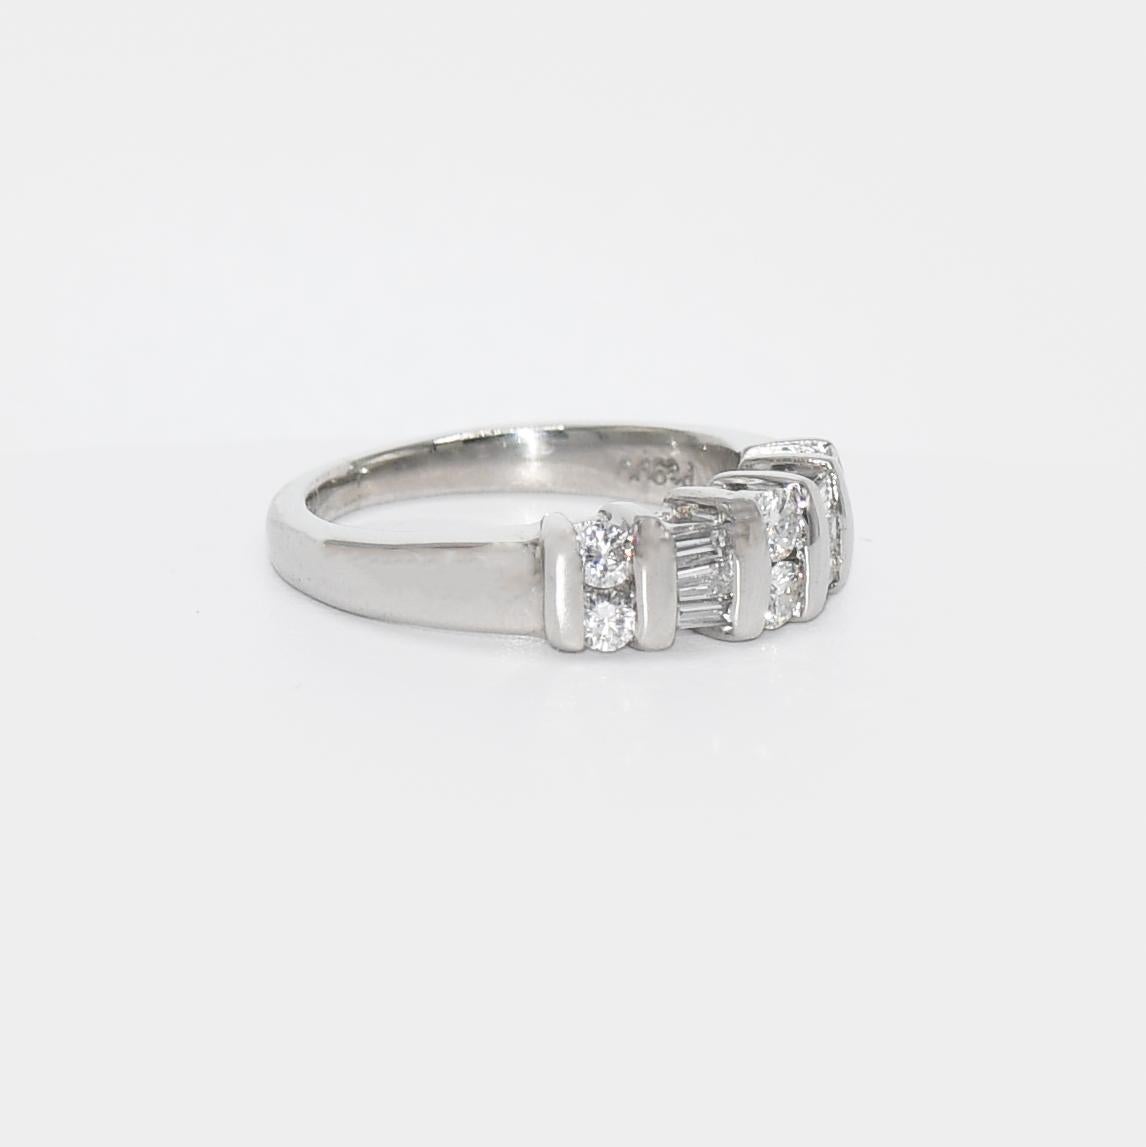 Platinum Diamond Band .50tdw, 7g
Ladies platinum and diamond ring. Stamped Pt 900 and weighs 7 grams.
The diamonds are round brilliant and baguette cuts, .50 totat carats, H,i, J color range, Vs to Si clarity.
The top of the ring measures 5.5mm